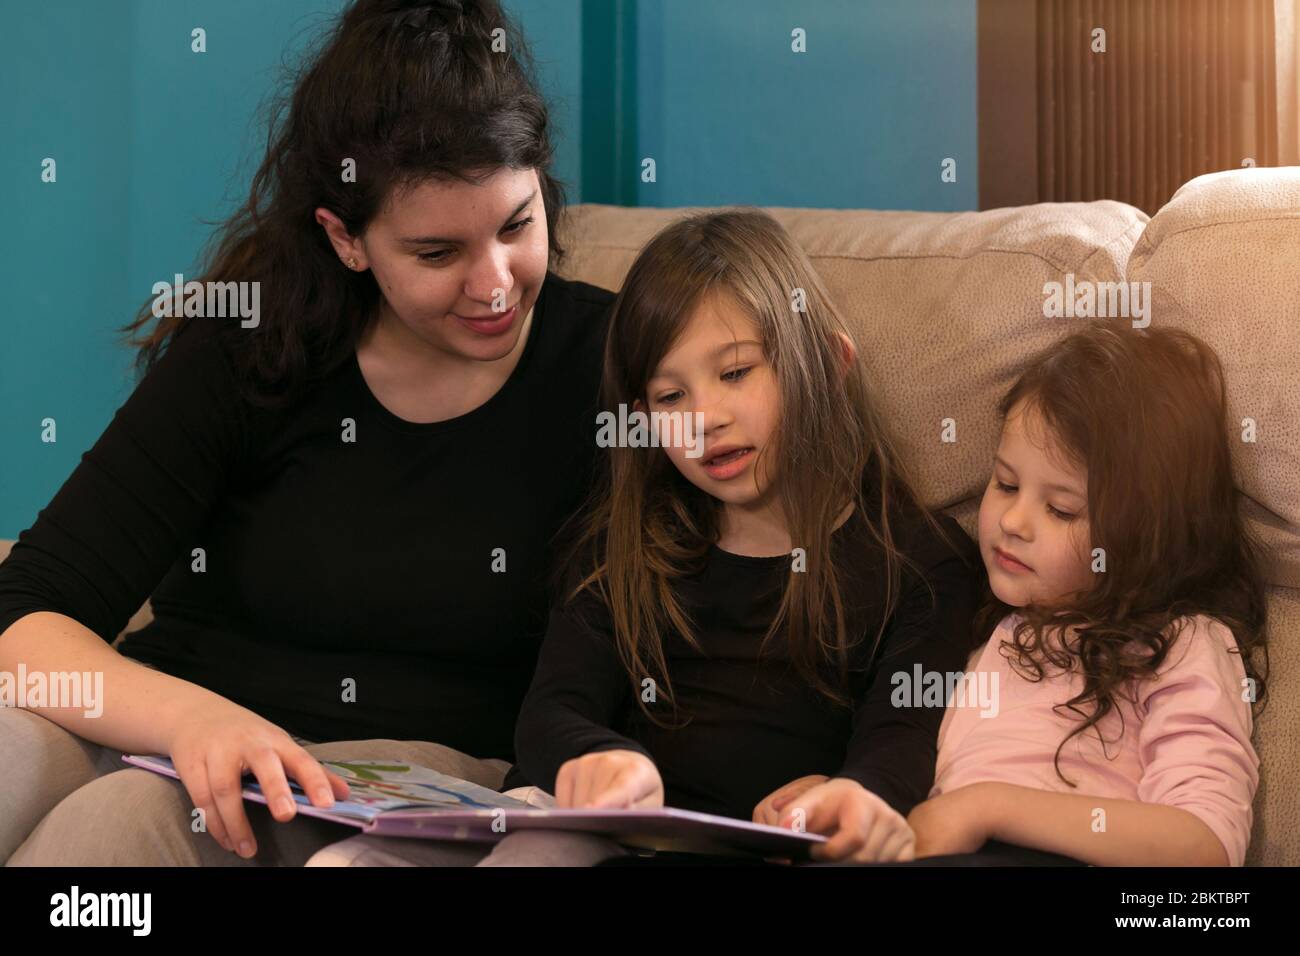 https://c8.alamy.com/comp/2BKTBPT/two-young-children-reading-stories-with-their-mother-on-the-couch-2BKTBPT.jpg